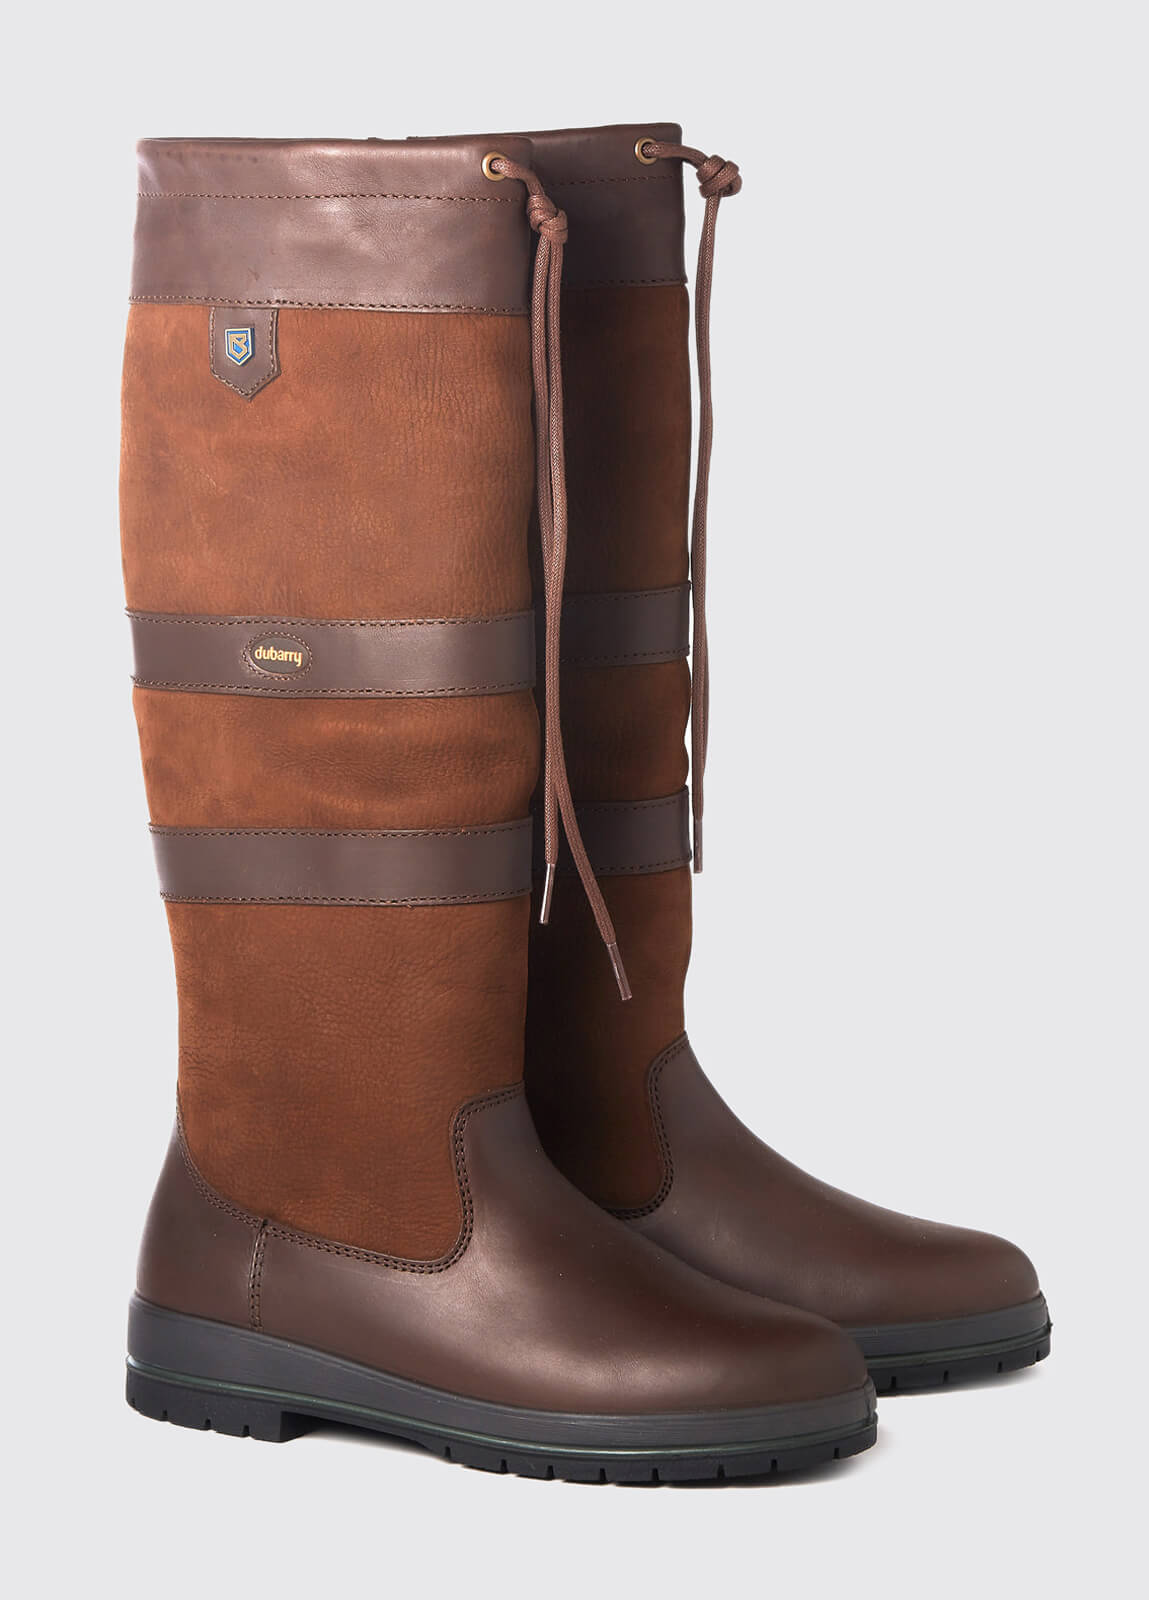 Narrower calf fitting Dubarry knee-high walnut brown leather Galway Country Boot with laced top